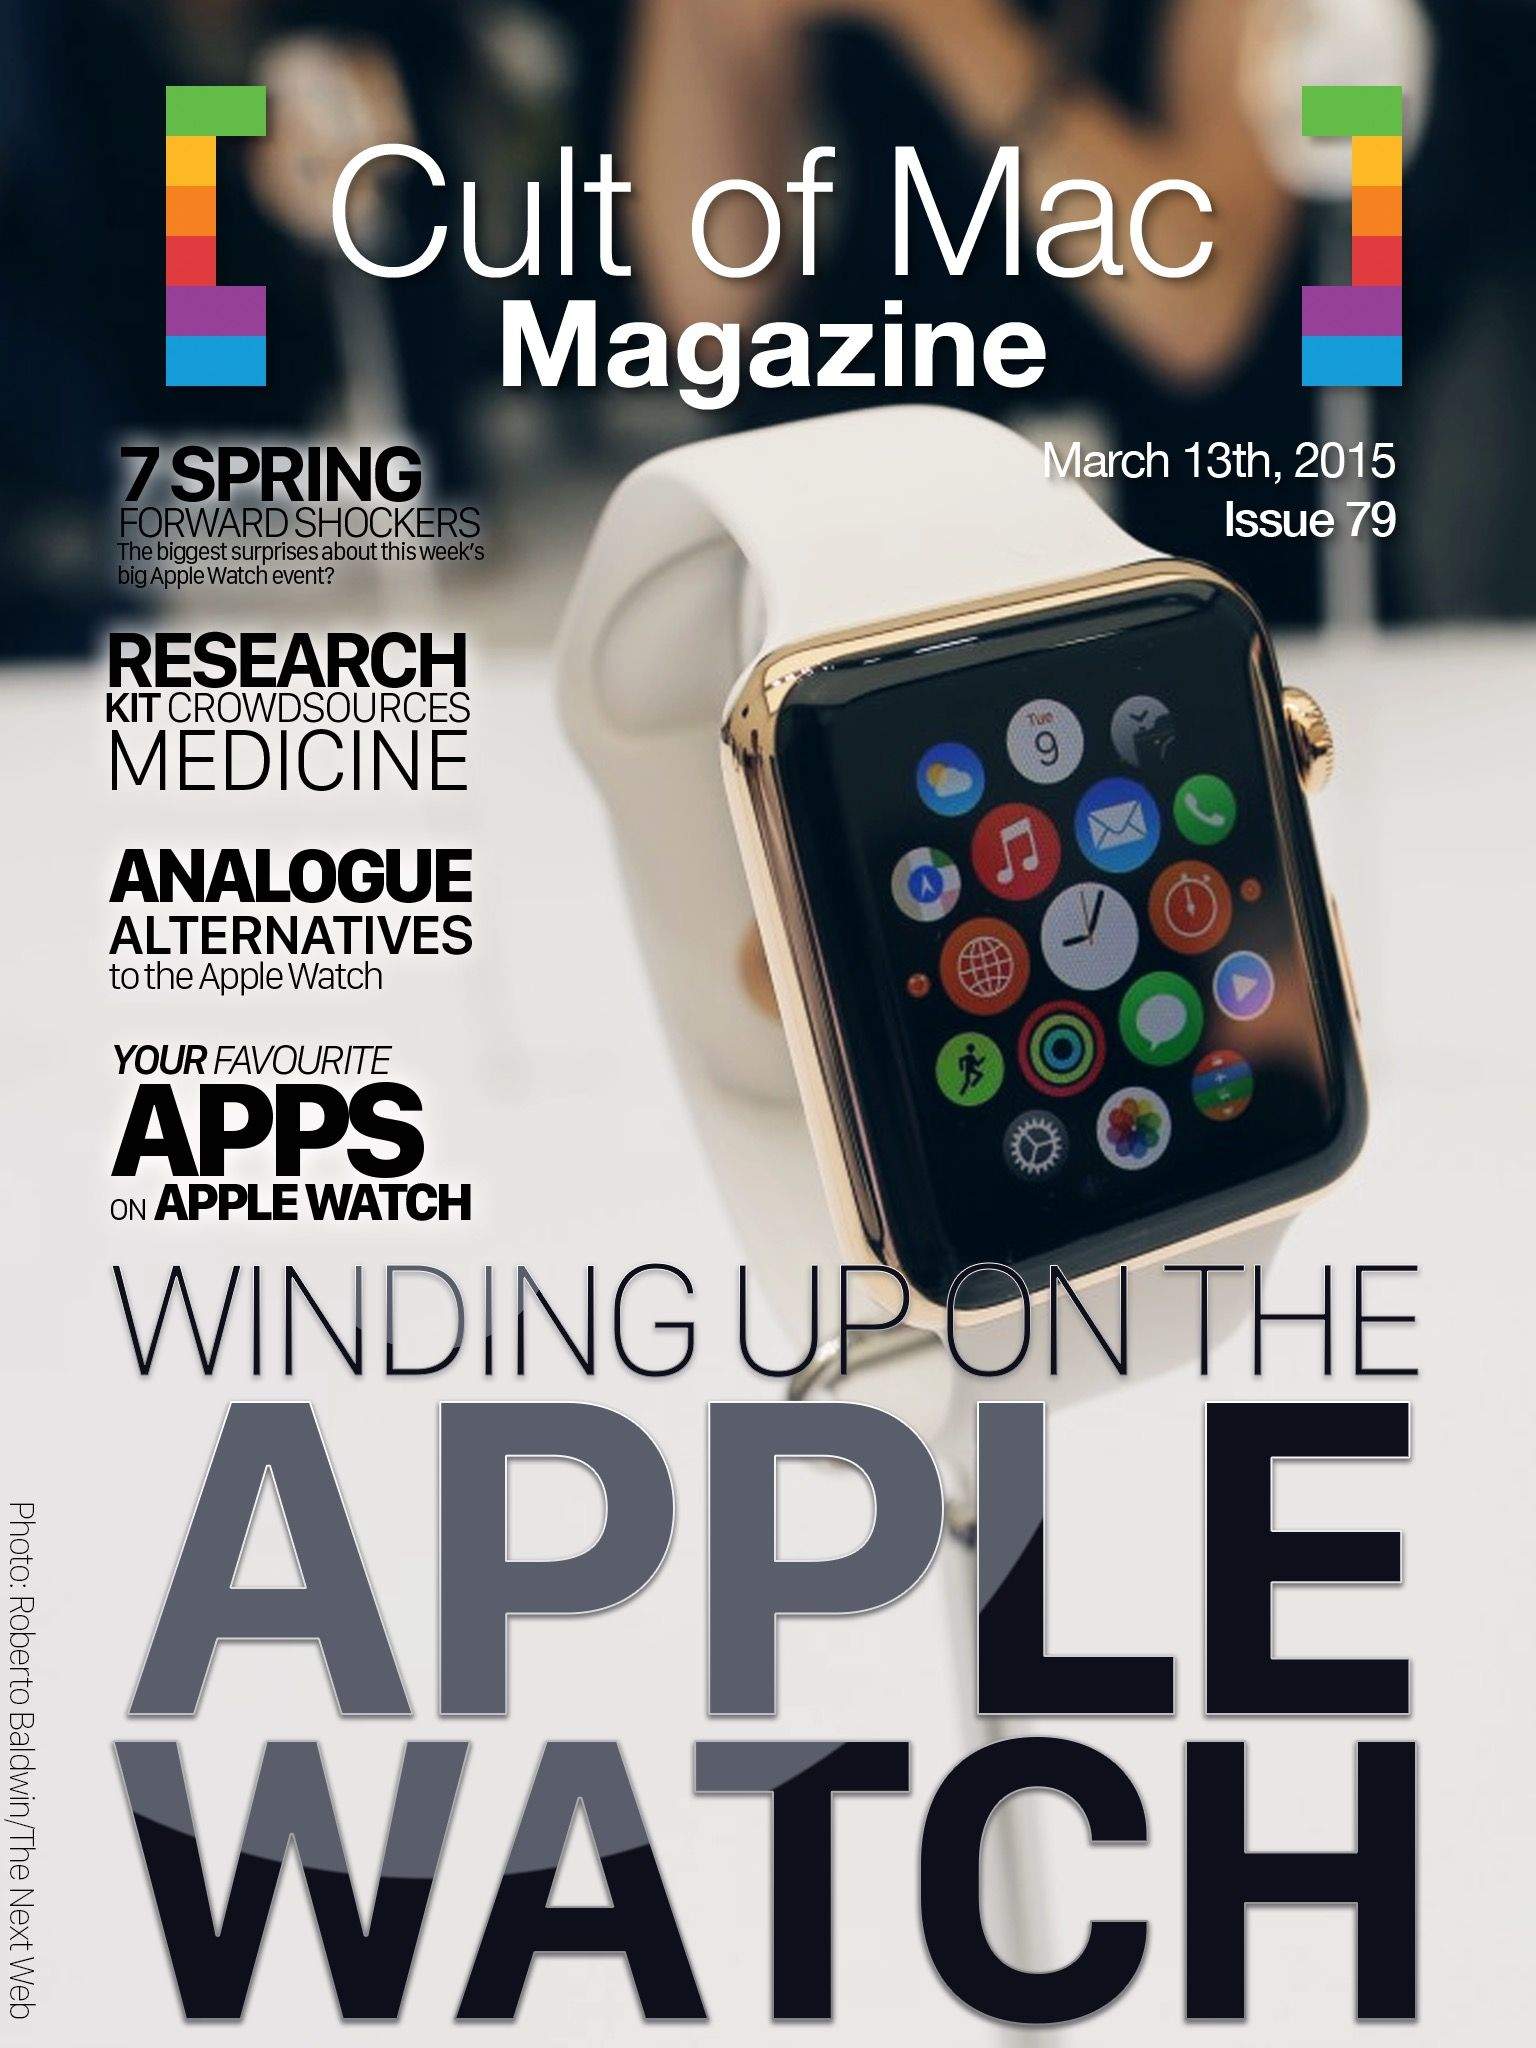 It's been an Apple Watch kind of week, right? Cover Design: Stephen Smith